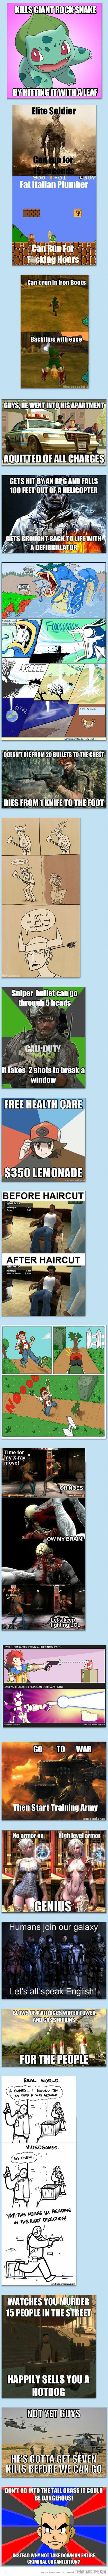 25 Video Game Logic Things That Will Make You Laugh Out Loud